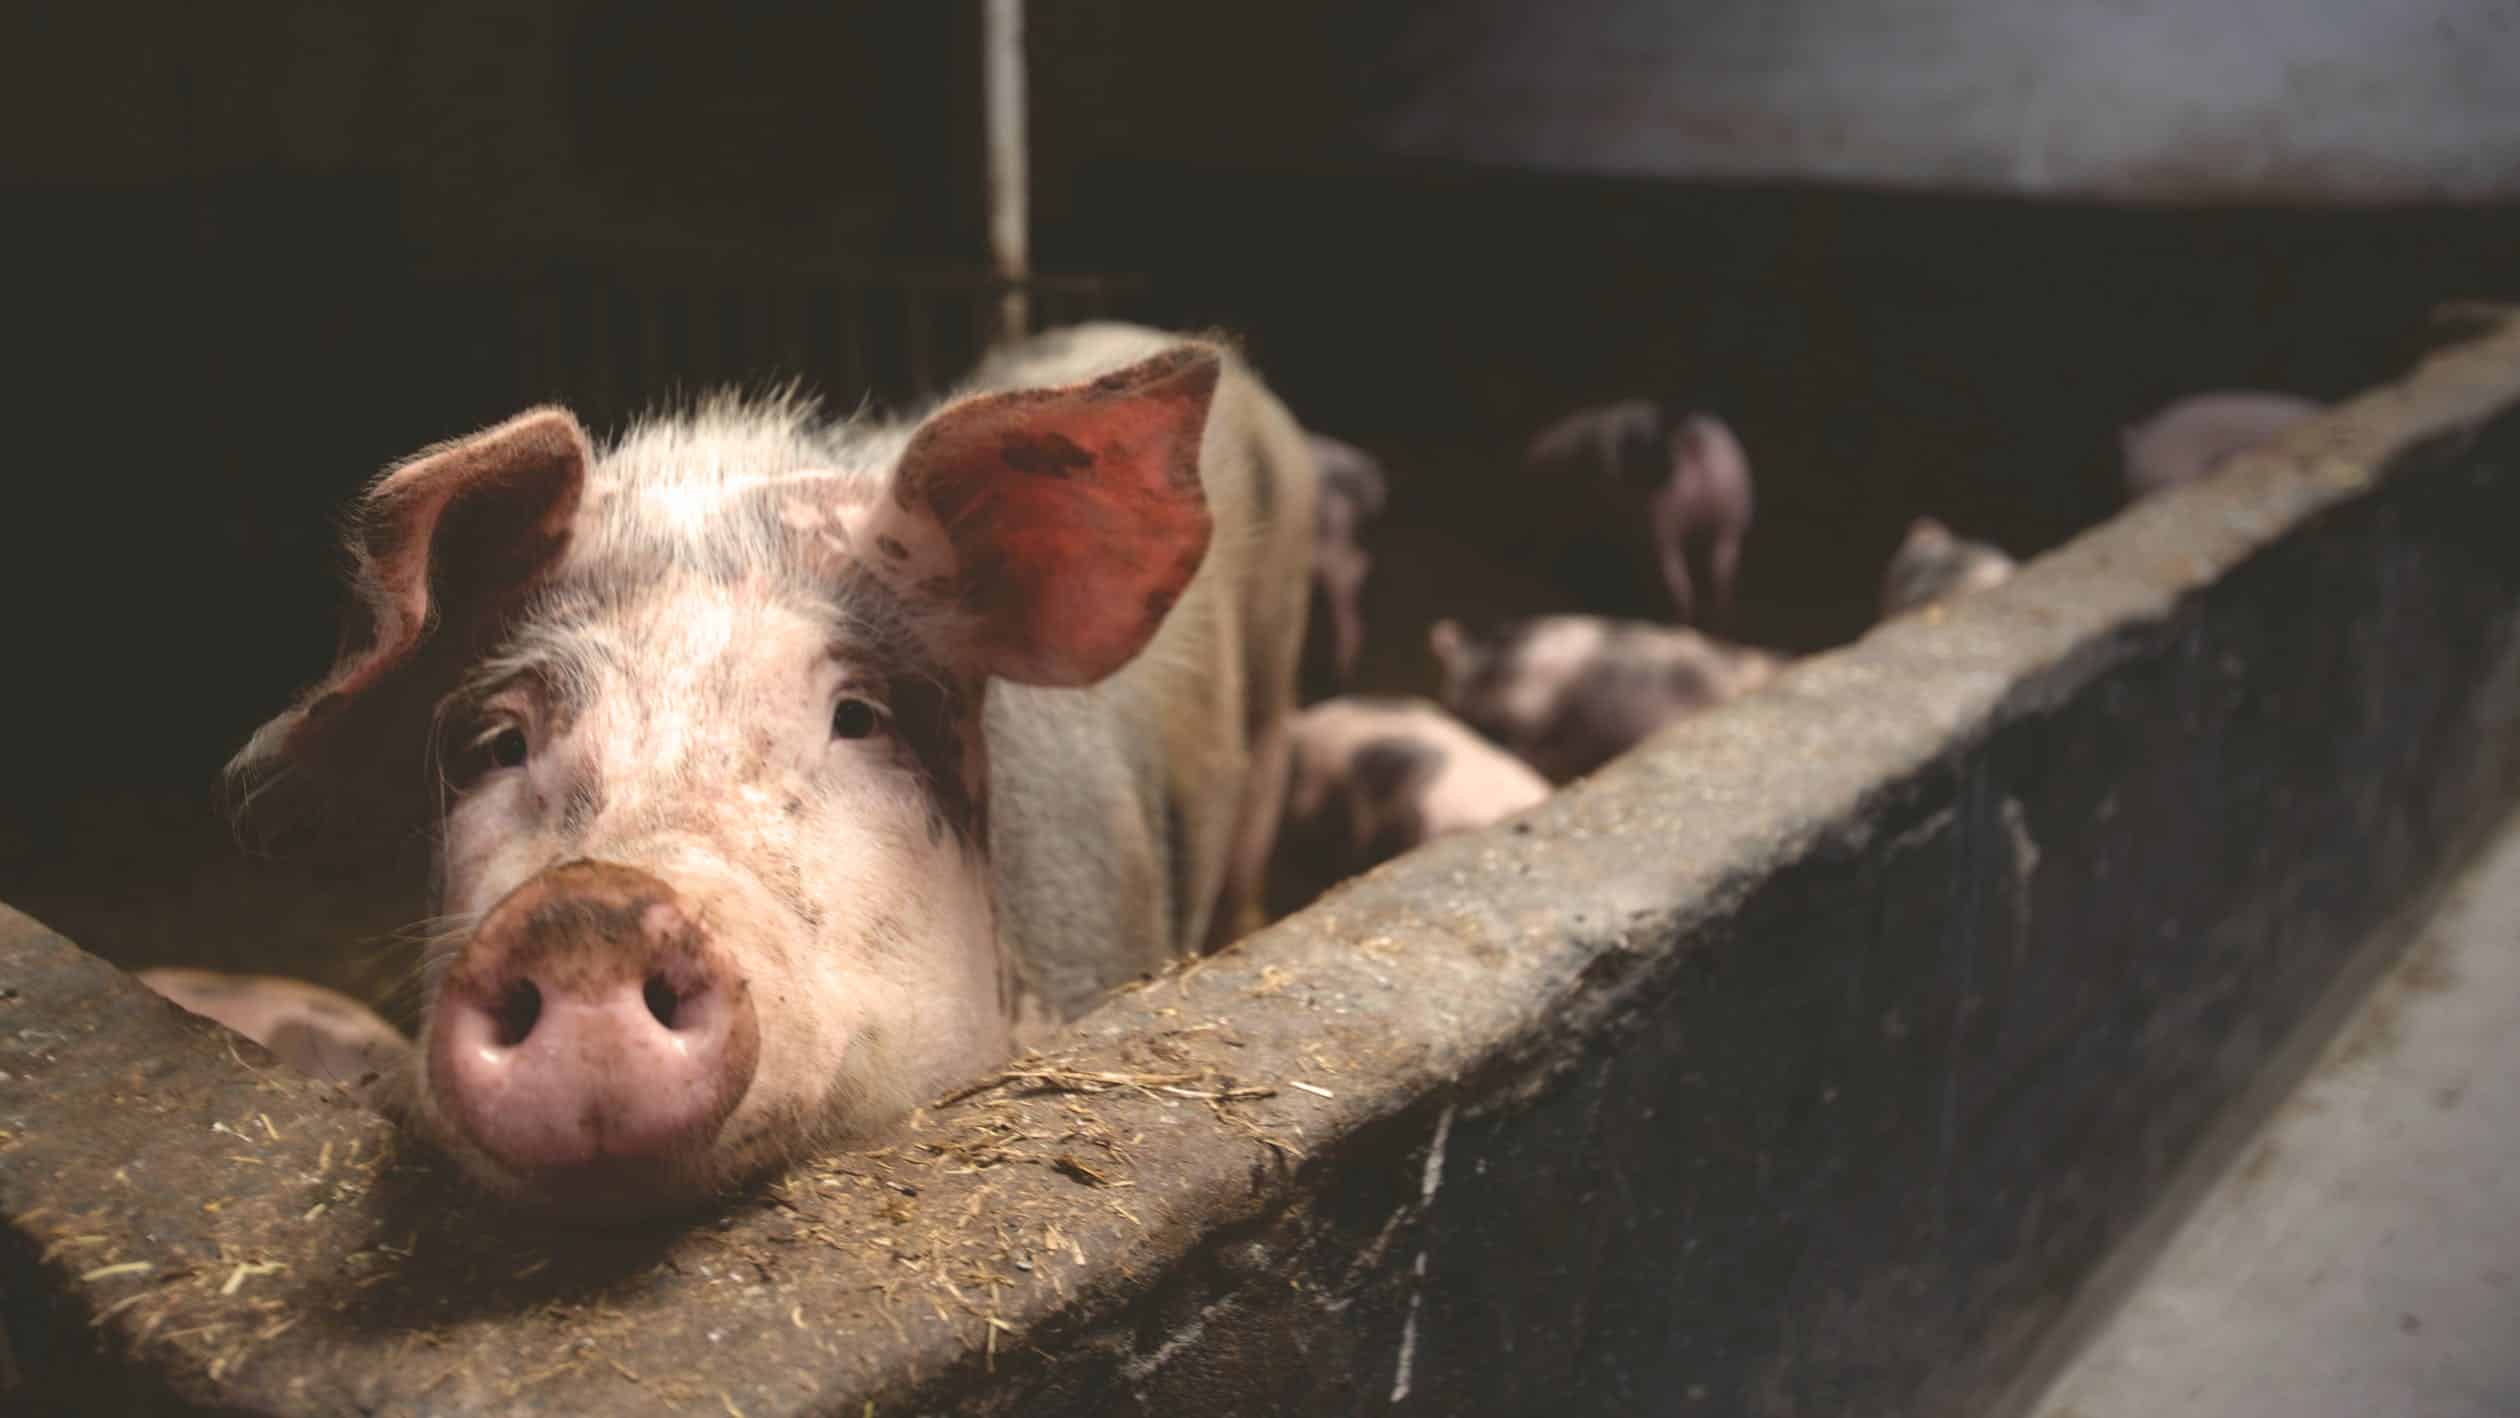 ‘Brexit ruined my pig farm’: Devastated farmers speak out